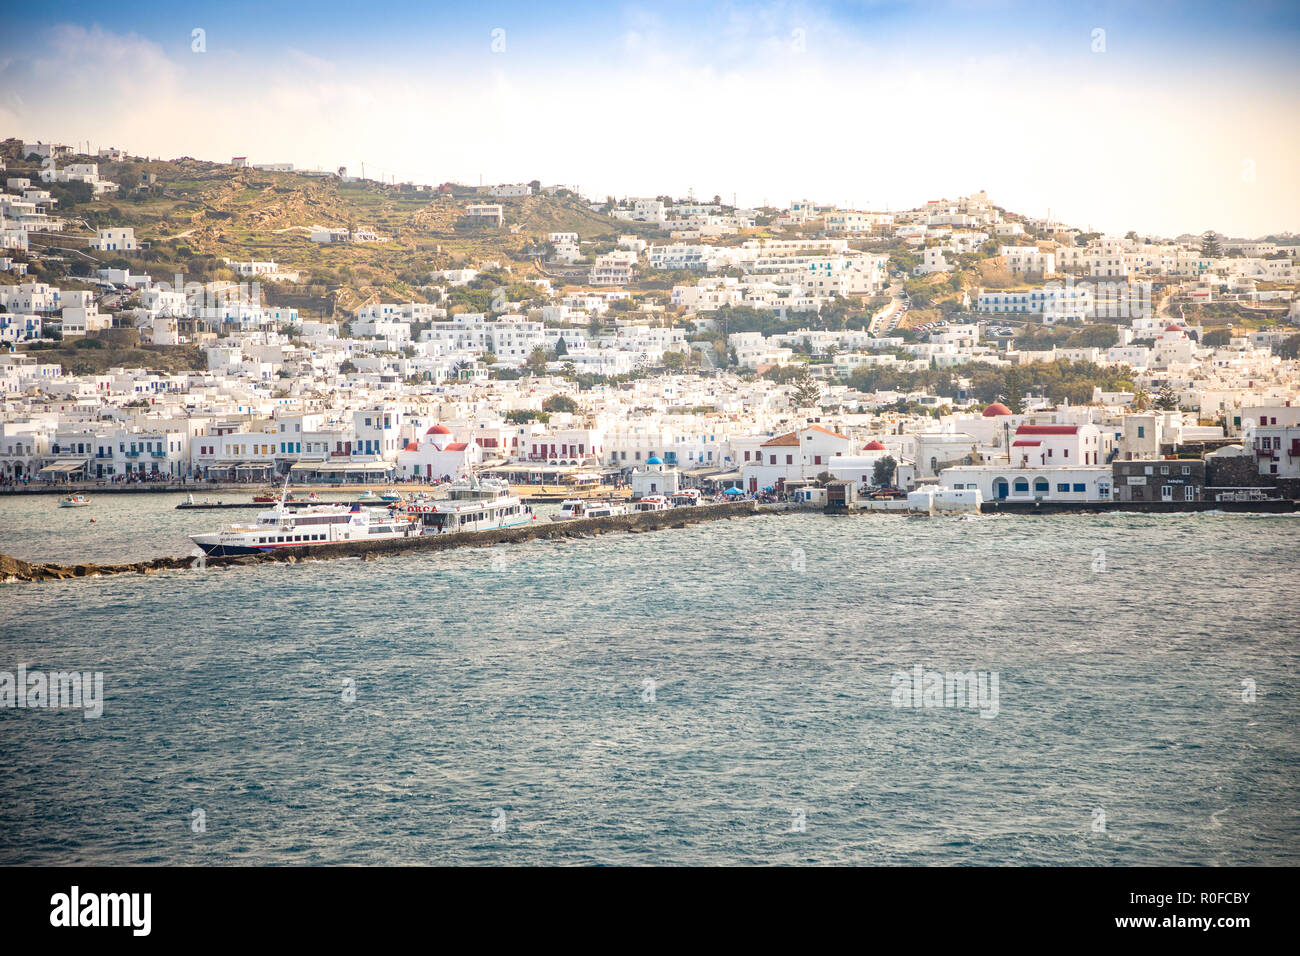 Mykonos, Greece - 17.10.2018: Mykonos island aerial panoramic view, part of the Cyclades, Greece Stock Photo